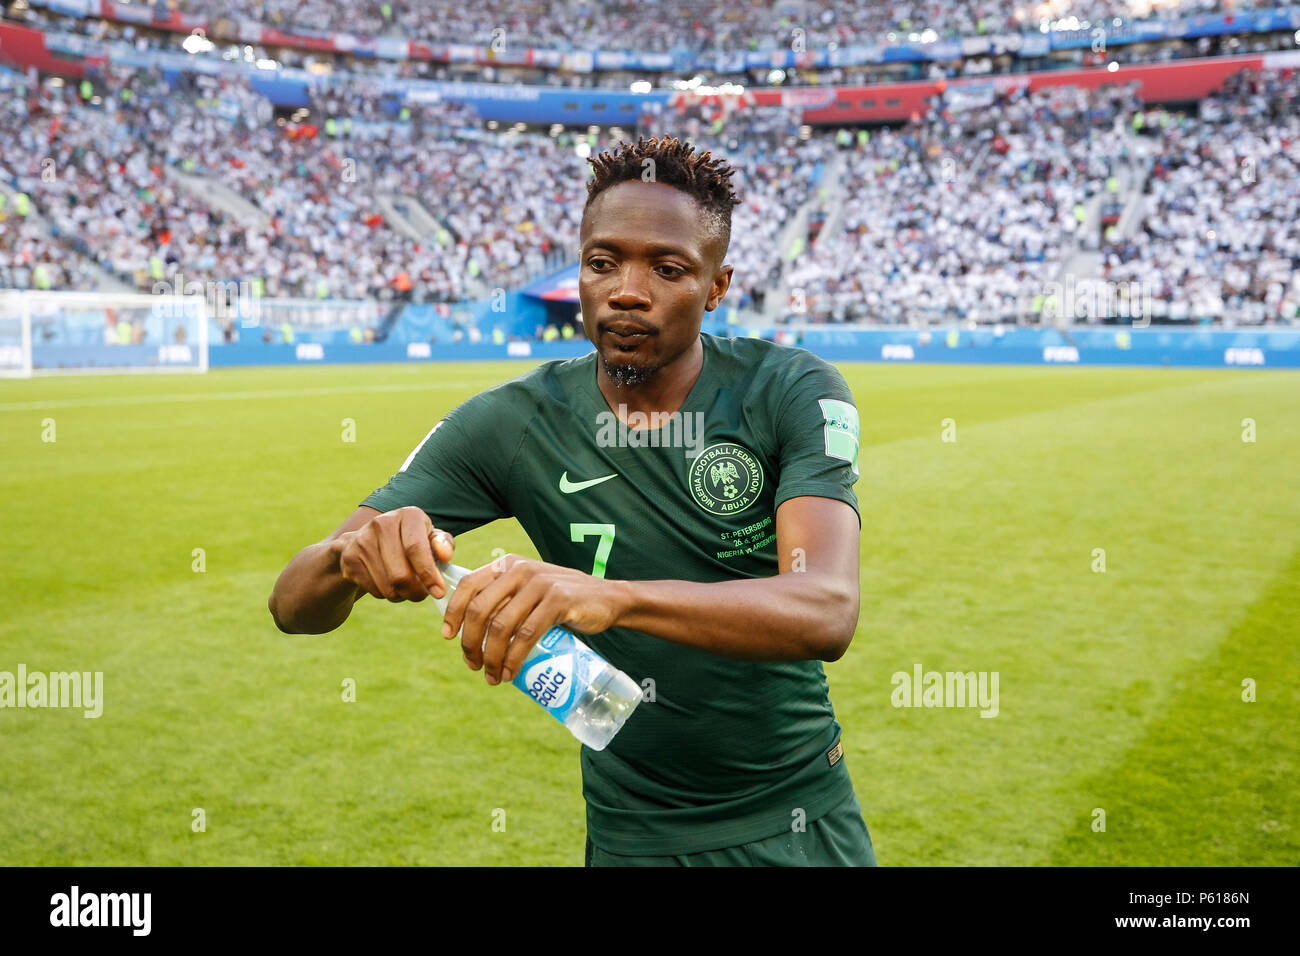 St Petersburg, Russia. 26th Jun, 2018. Ahmed Musa of Nigeria during the 2018 FIFA World Cup Group D match between Nigeria and Argentina at Saint Petersburg Stadium on June 26th 2018 in Saint Petersburg, Russia. (Photo by Daniel Chesterton/phcimages.com) Credit: PHC Images/Alamy Live News Stock Photo